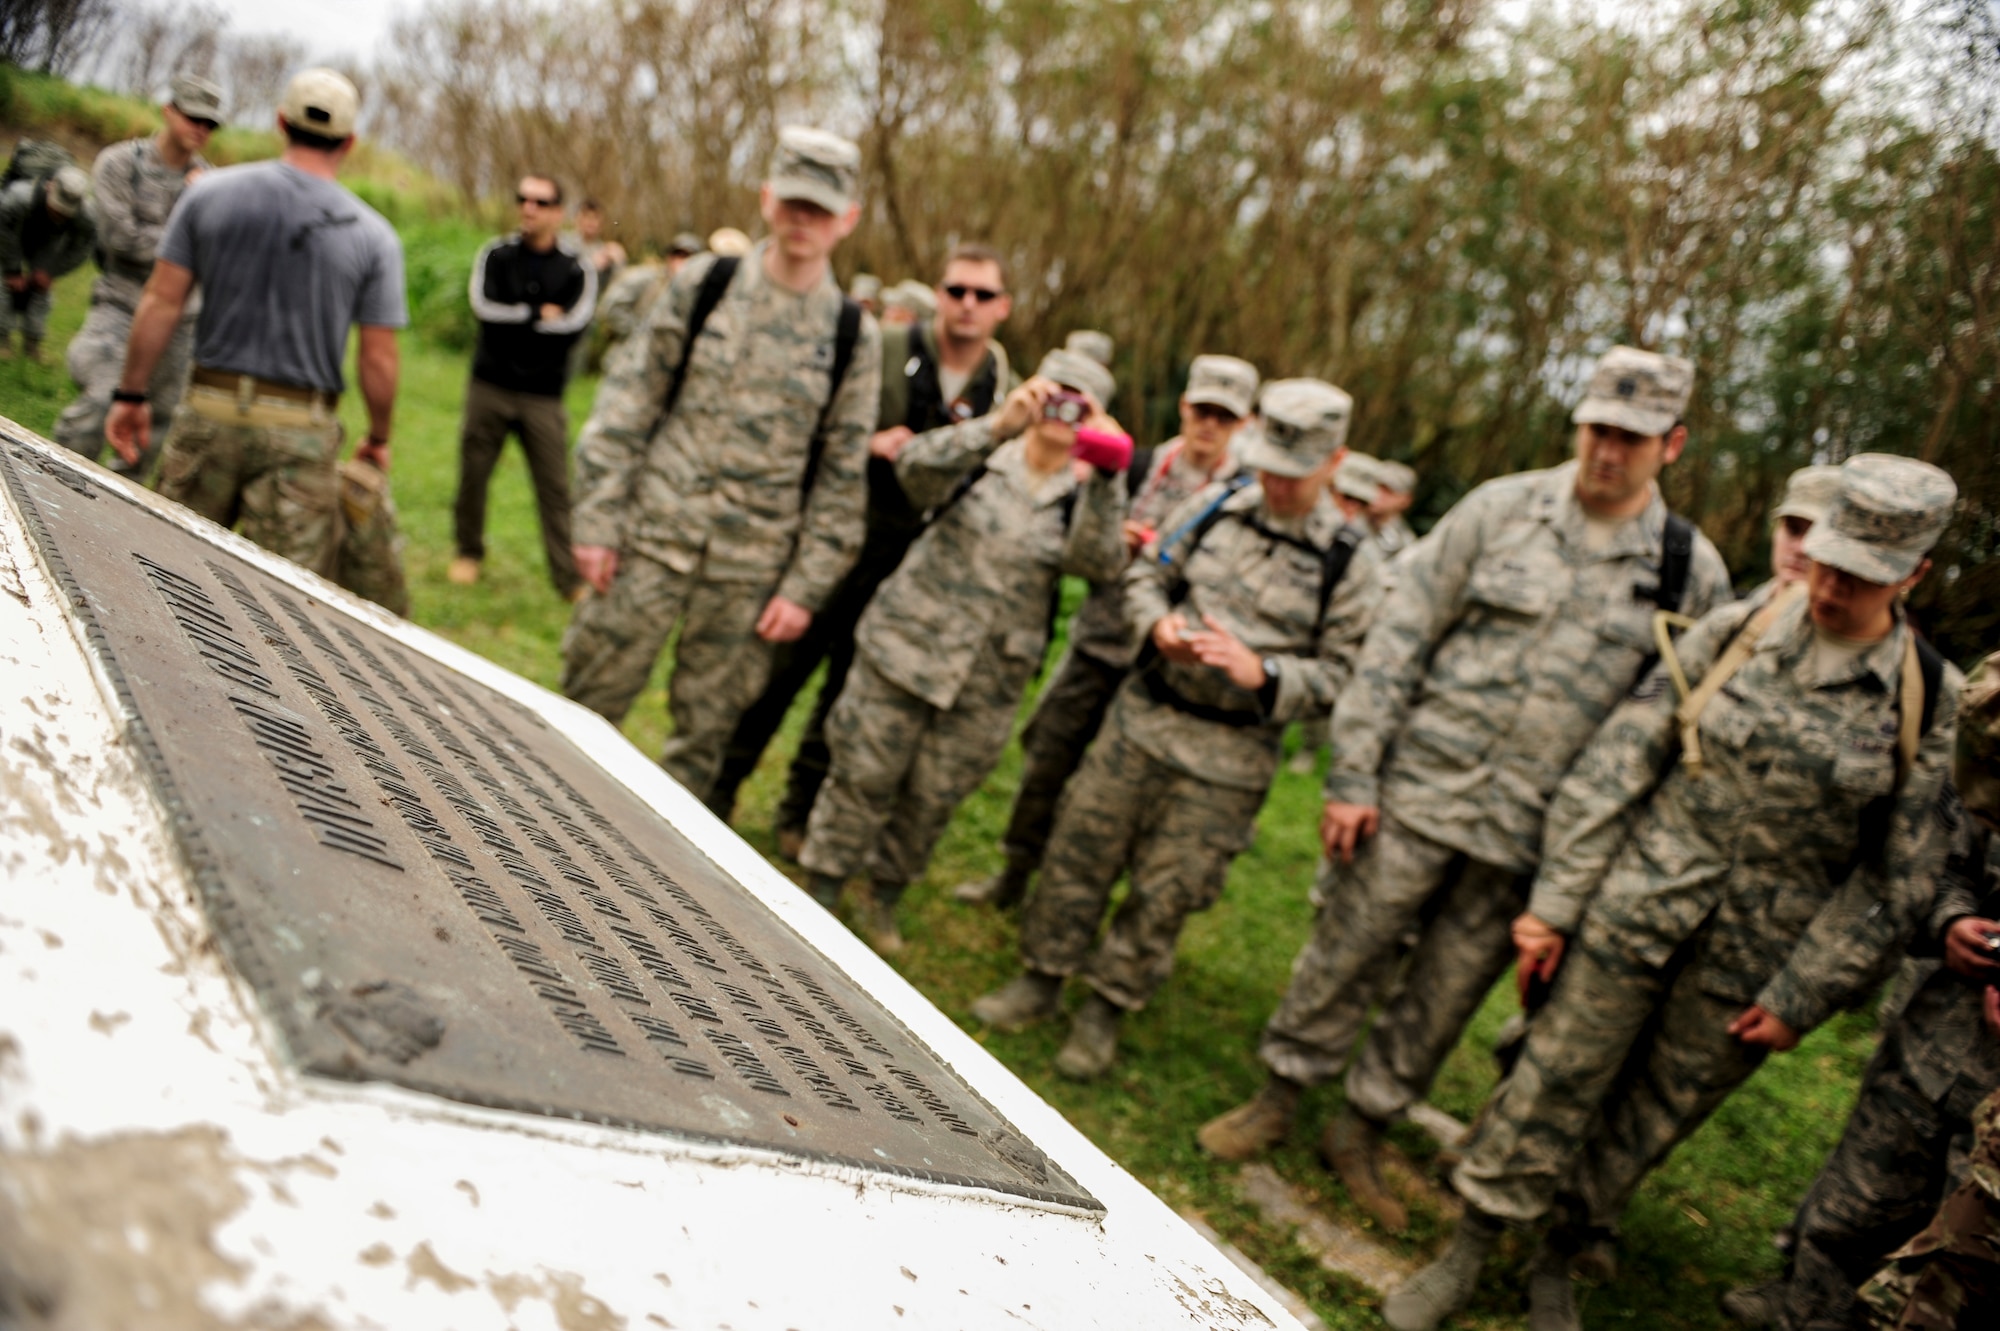 Airmen from Kadena Air Base, Japan, gather around a World War II memorial on Iwo To, Japan Jan. 8, 2015. They visited the island for a day to see the battleground, once known as Iwo Jima, of the largest assault in U.S. Marine Corps history. More than 6,800 Marines died over a period of 36 days. (U.S. Air Force photo by Airman 1st Class John Linzmeier)